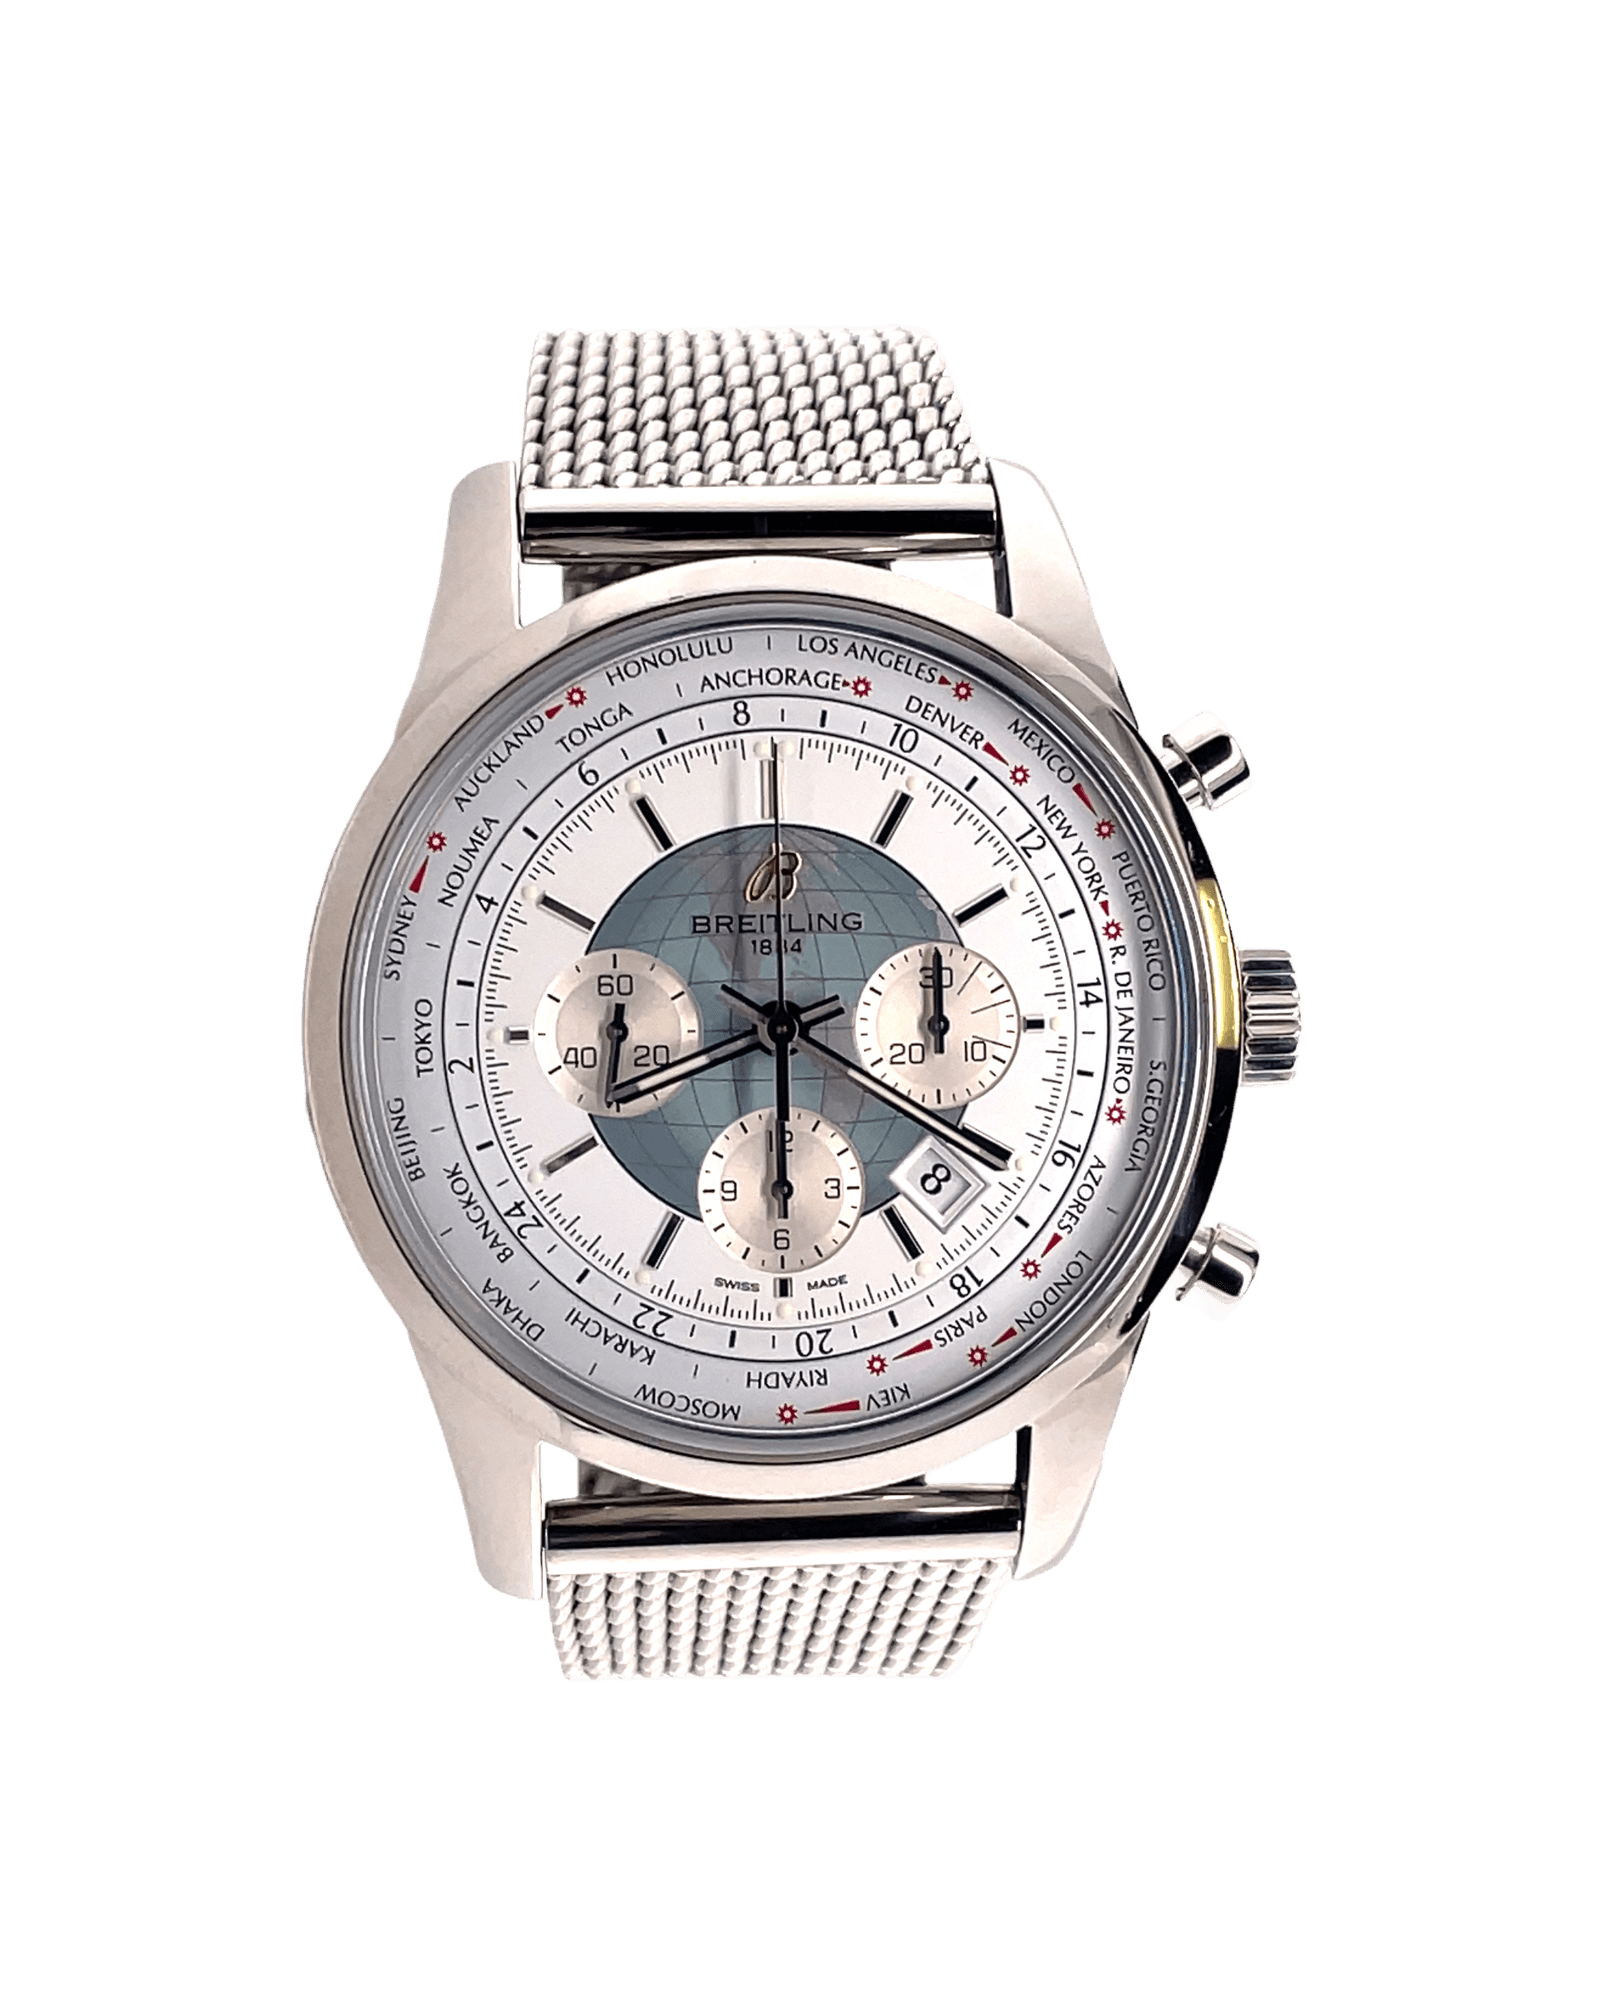 STAINLESS STEEL BREITLING TRANSOCEAN CHRONOGRAPH